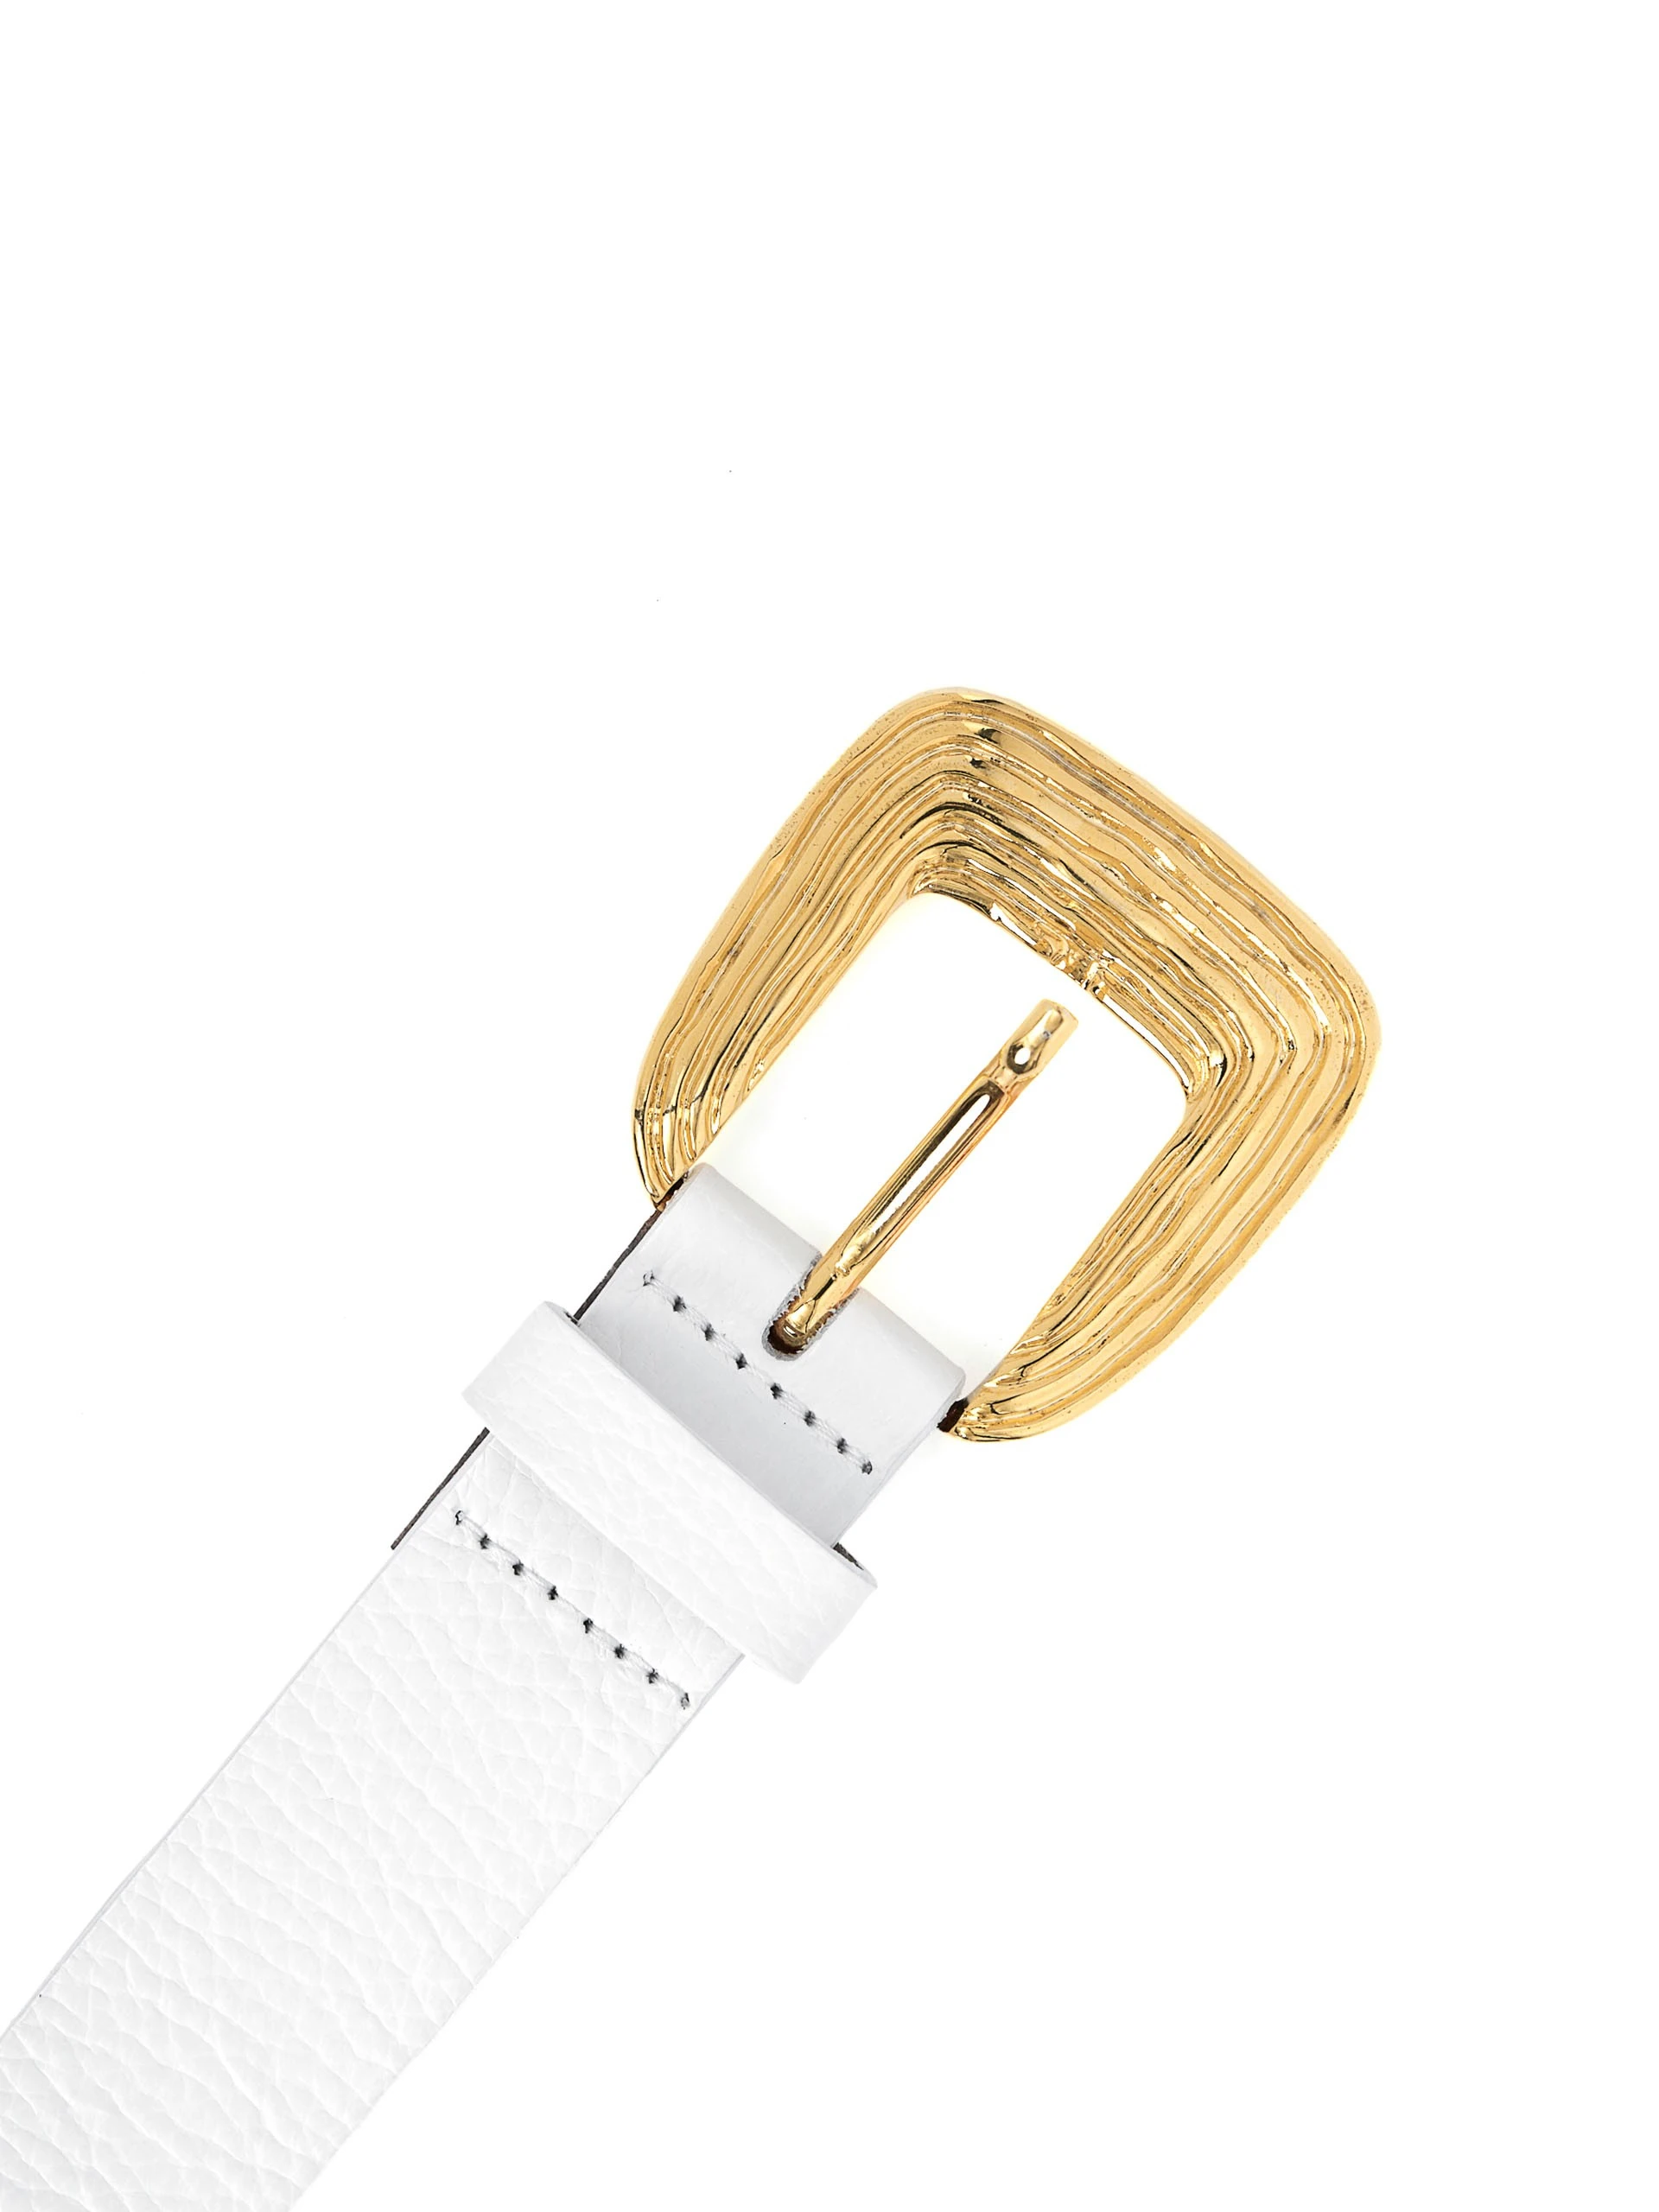 WHITE BELT WITH GOLD BUCKLE